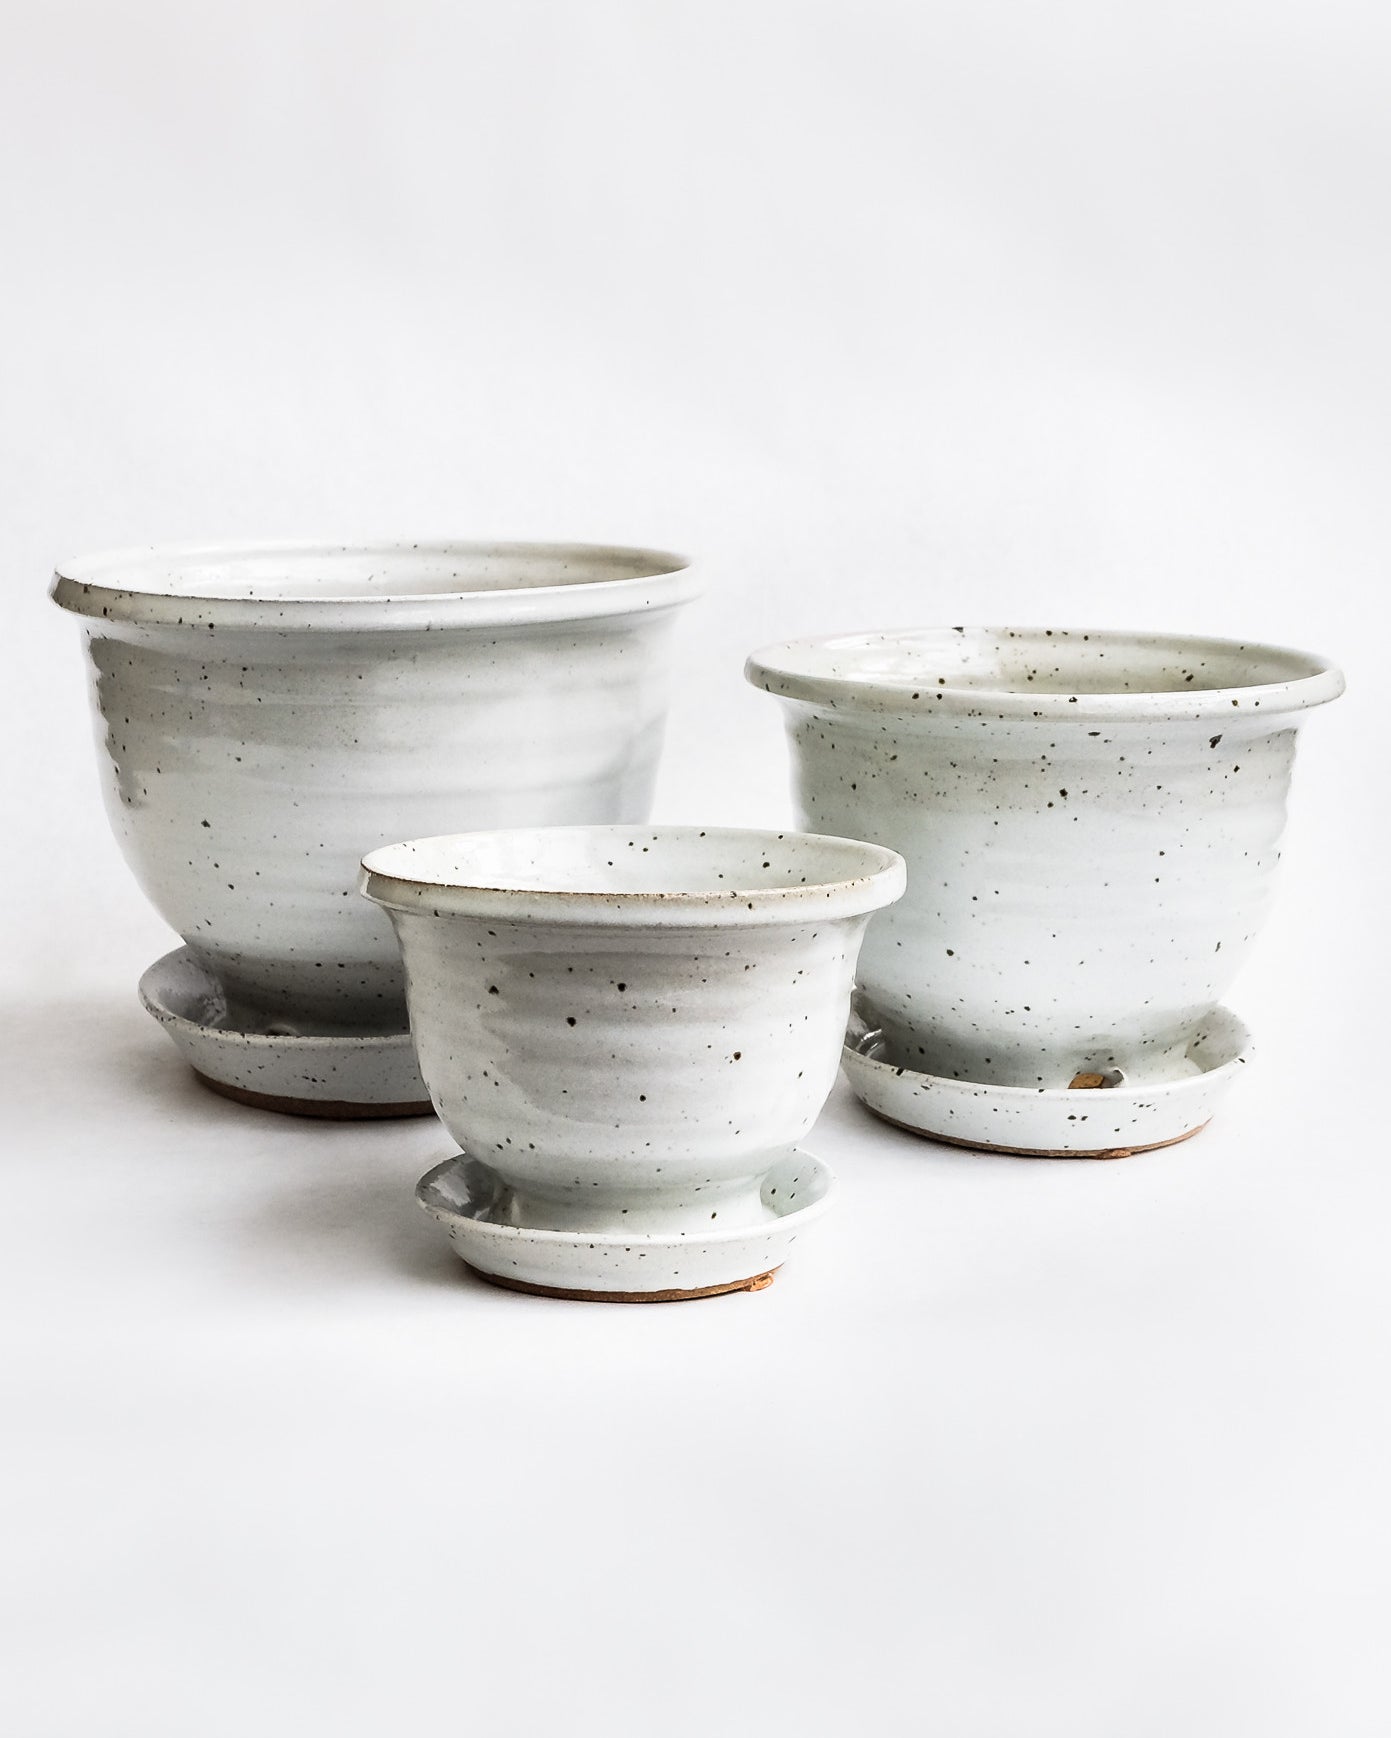 Handcrafted white speckled pots with attached drainage tray on white background